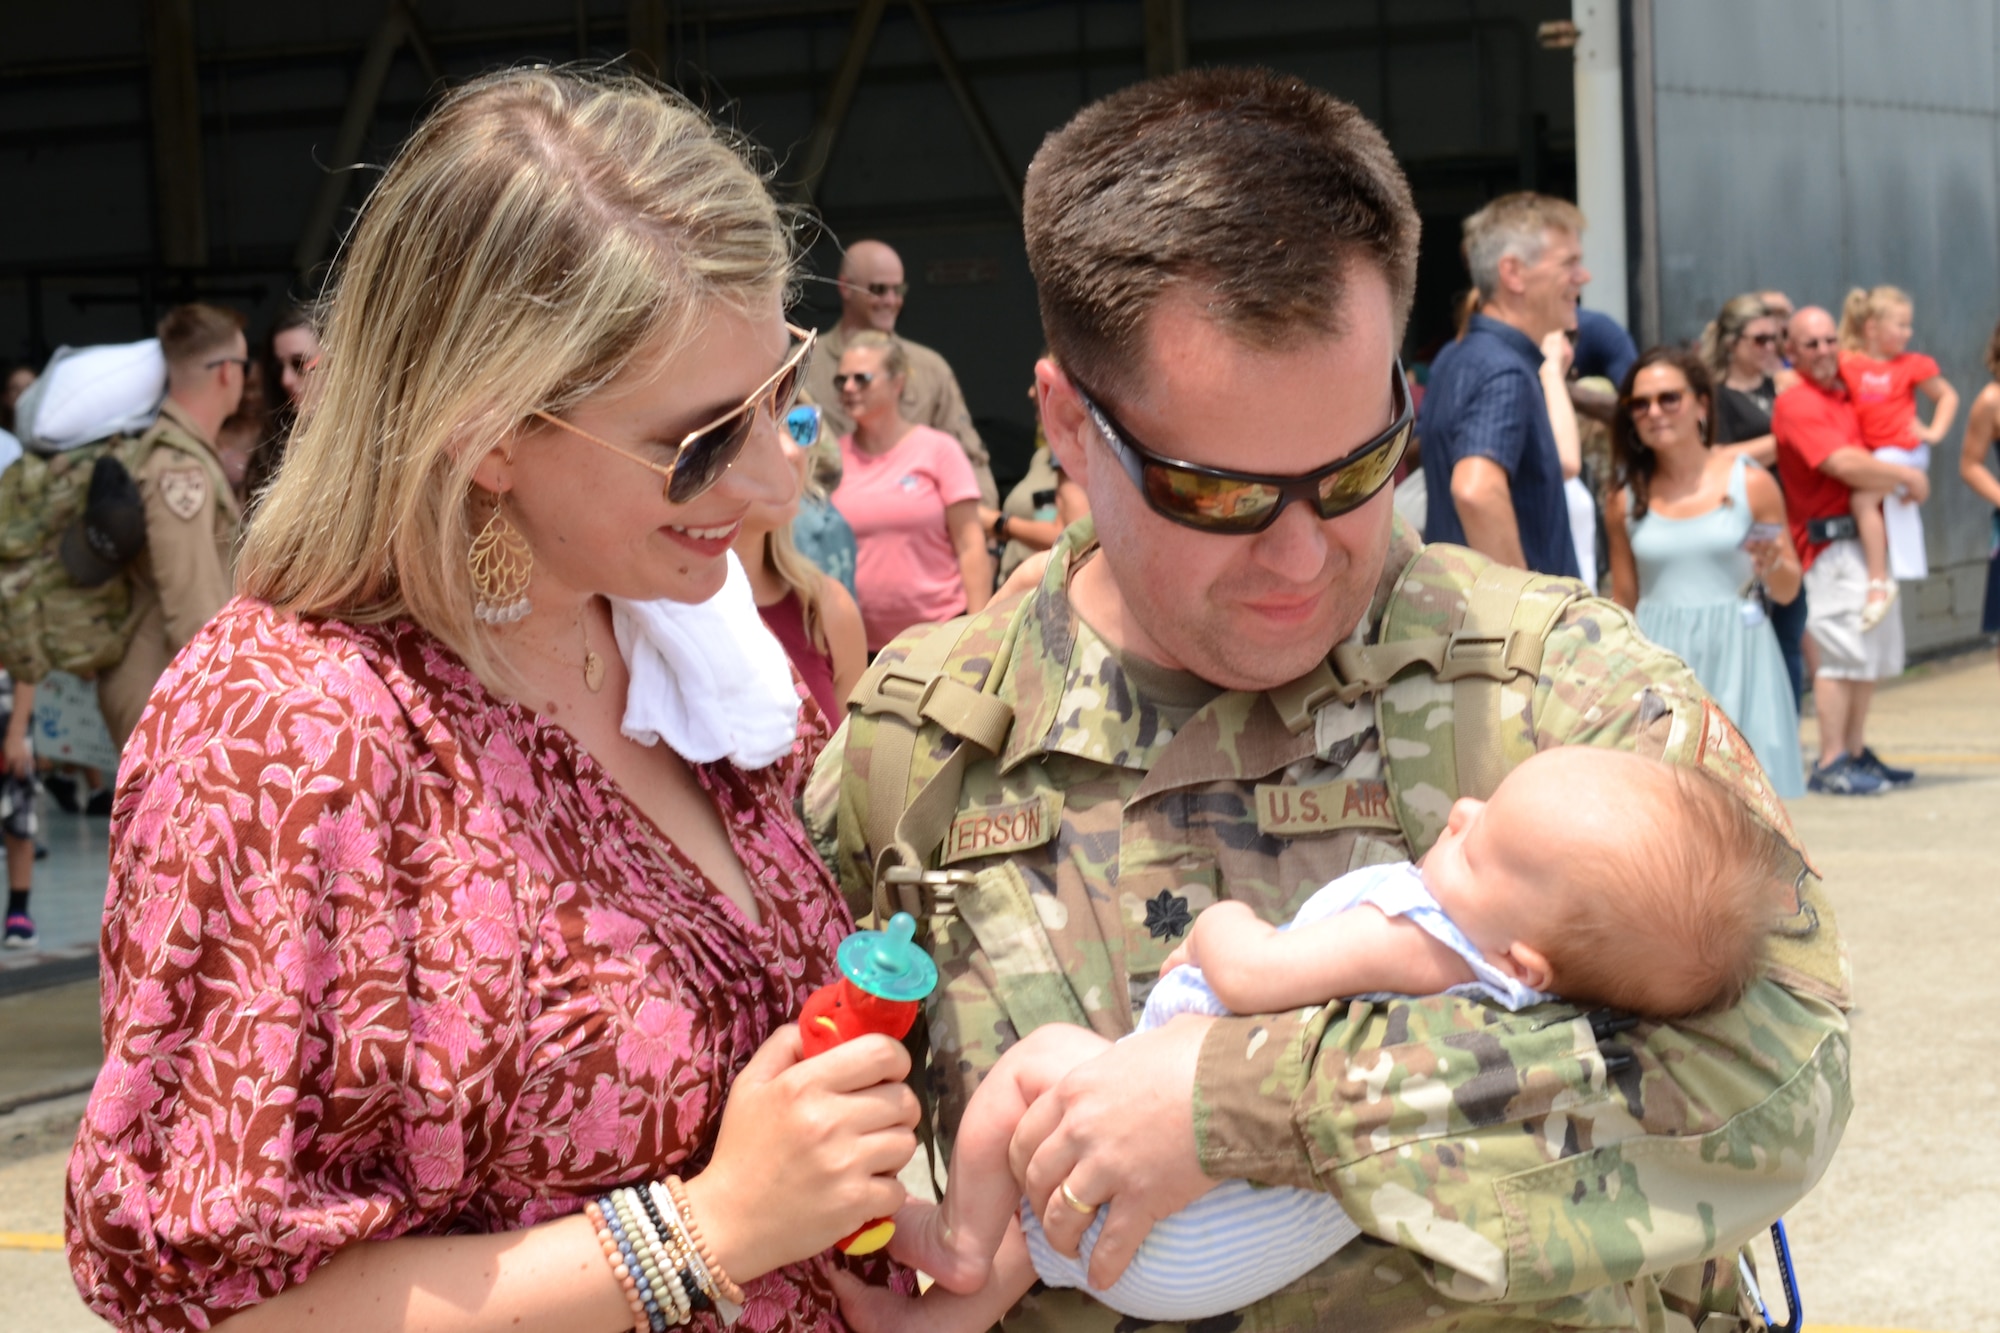 U.S. Air Force Lt. Col. Grady Patterson meets his new born son for the first time July 18, 2021 at McEntire Joint National Guard Base, South Carolina. U.S. Air Force personnel from the 169th Fighter Wing returned today after being deployed to Prince Sultan Air Base, Kingdom of Saudi Arabia for the past three months to project combat power and help bolster defensive capabilities against potential threats in the region. (U.S. Air National Guard photo by Lt. Col. Jim St.Clair, 169th Fighter Wing Public Affairs)